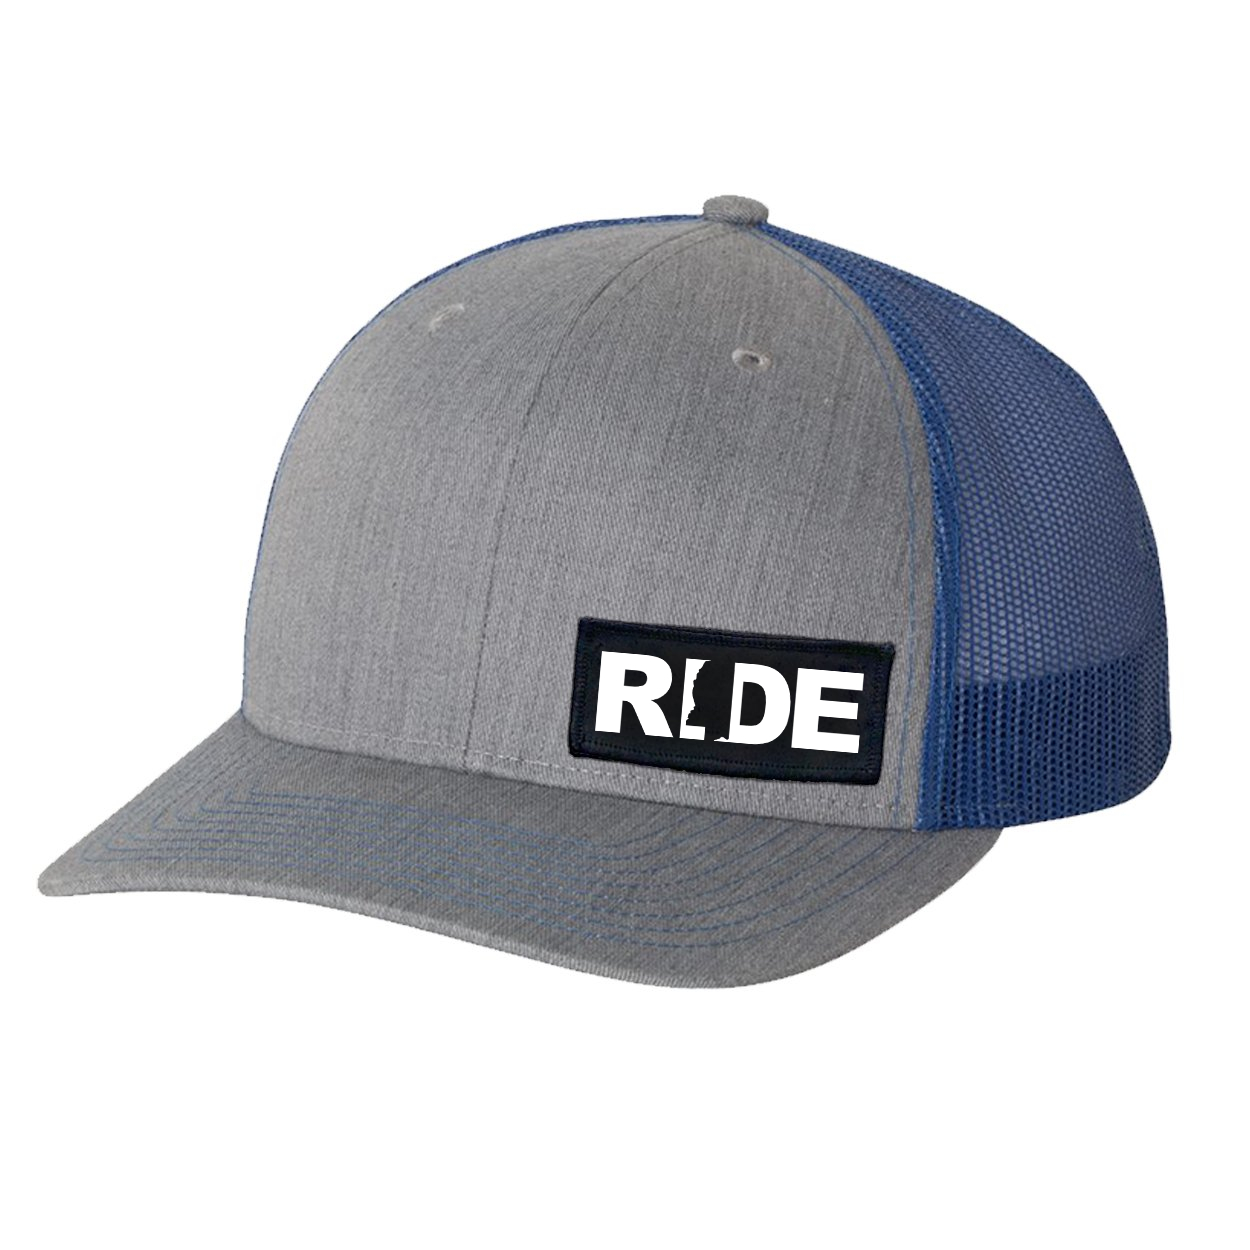 Ride Mississippi Night Out Woven Patch Snapback Trucker Hat Heather Grey/Royal (White Logo)